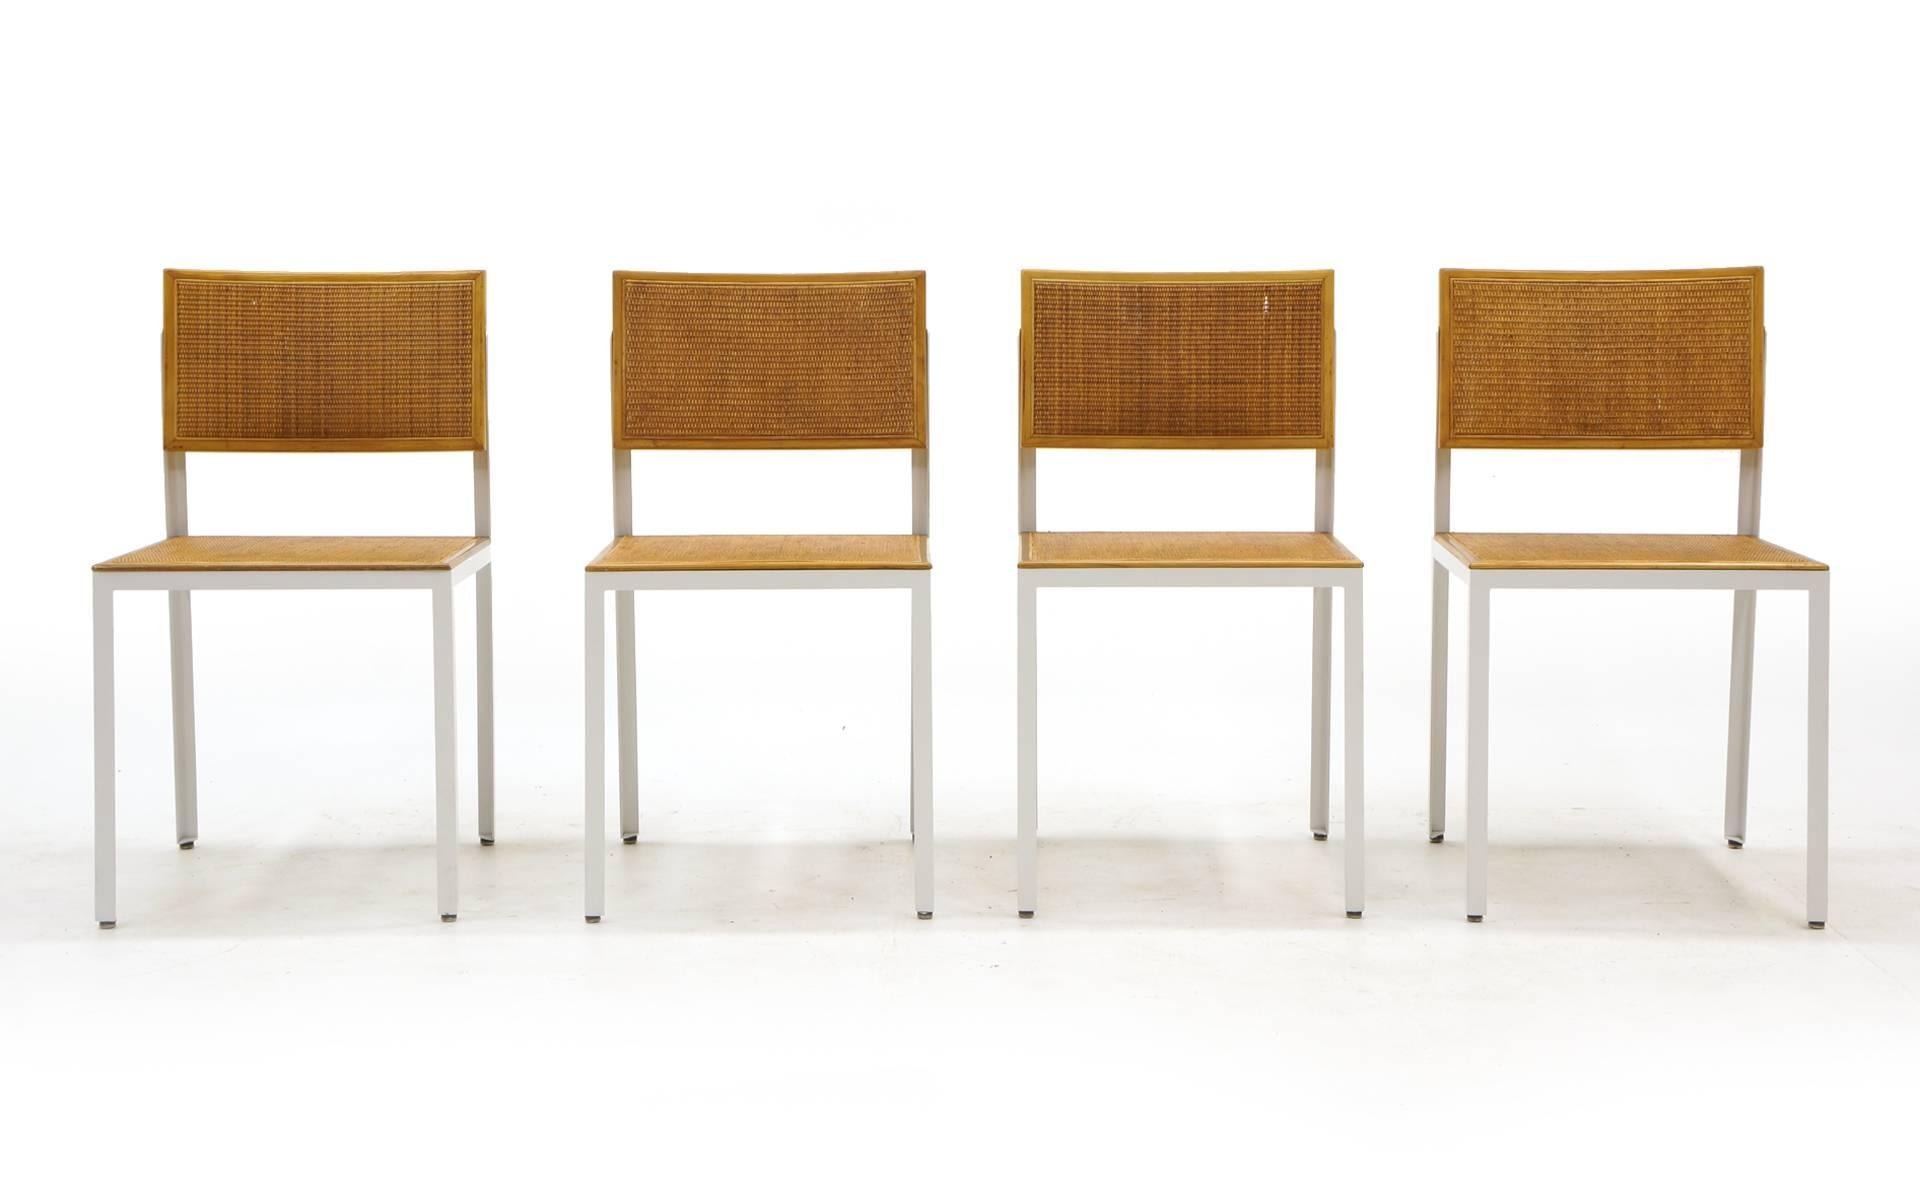 Rare set of four steel frame group dining chairs designed by George Nelson for Herman Miller. The original cane is in excellent condition. See our listing for the rosewood Nelson lazy susan dining table we purchased with these chairs.